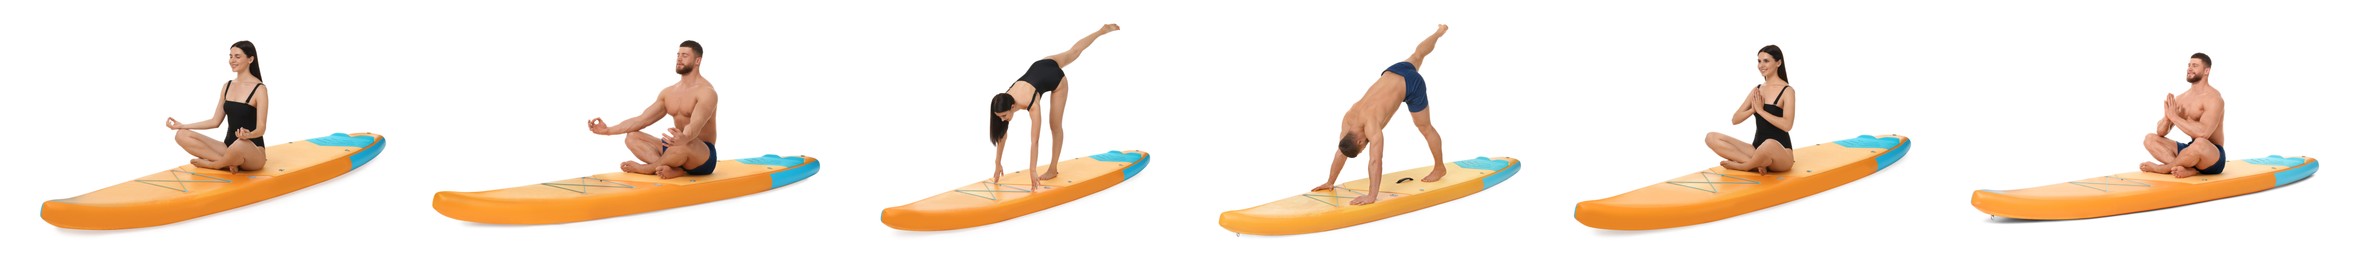 Collage with photos of young man and woman practicing yoga on sup board isolated on white